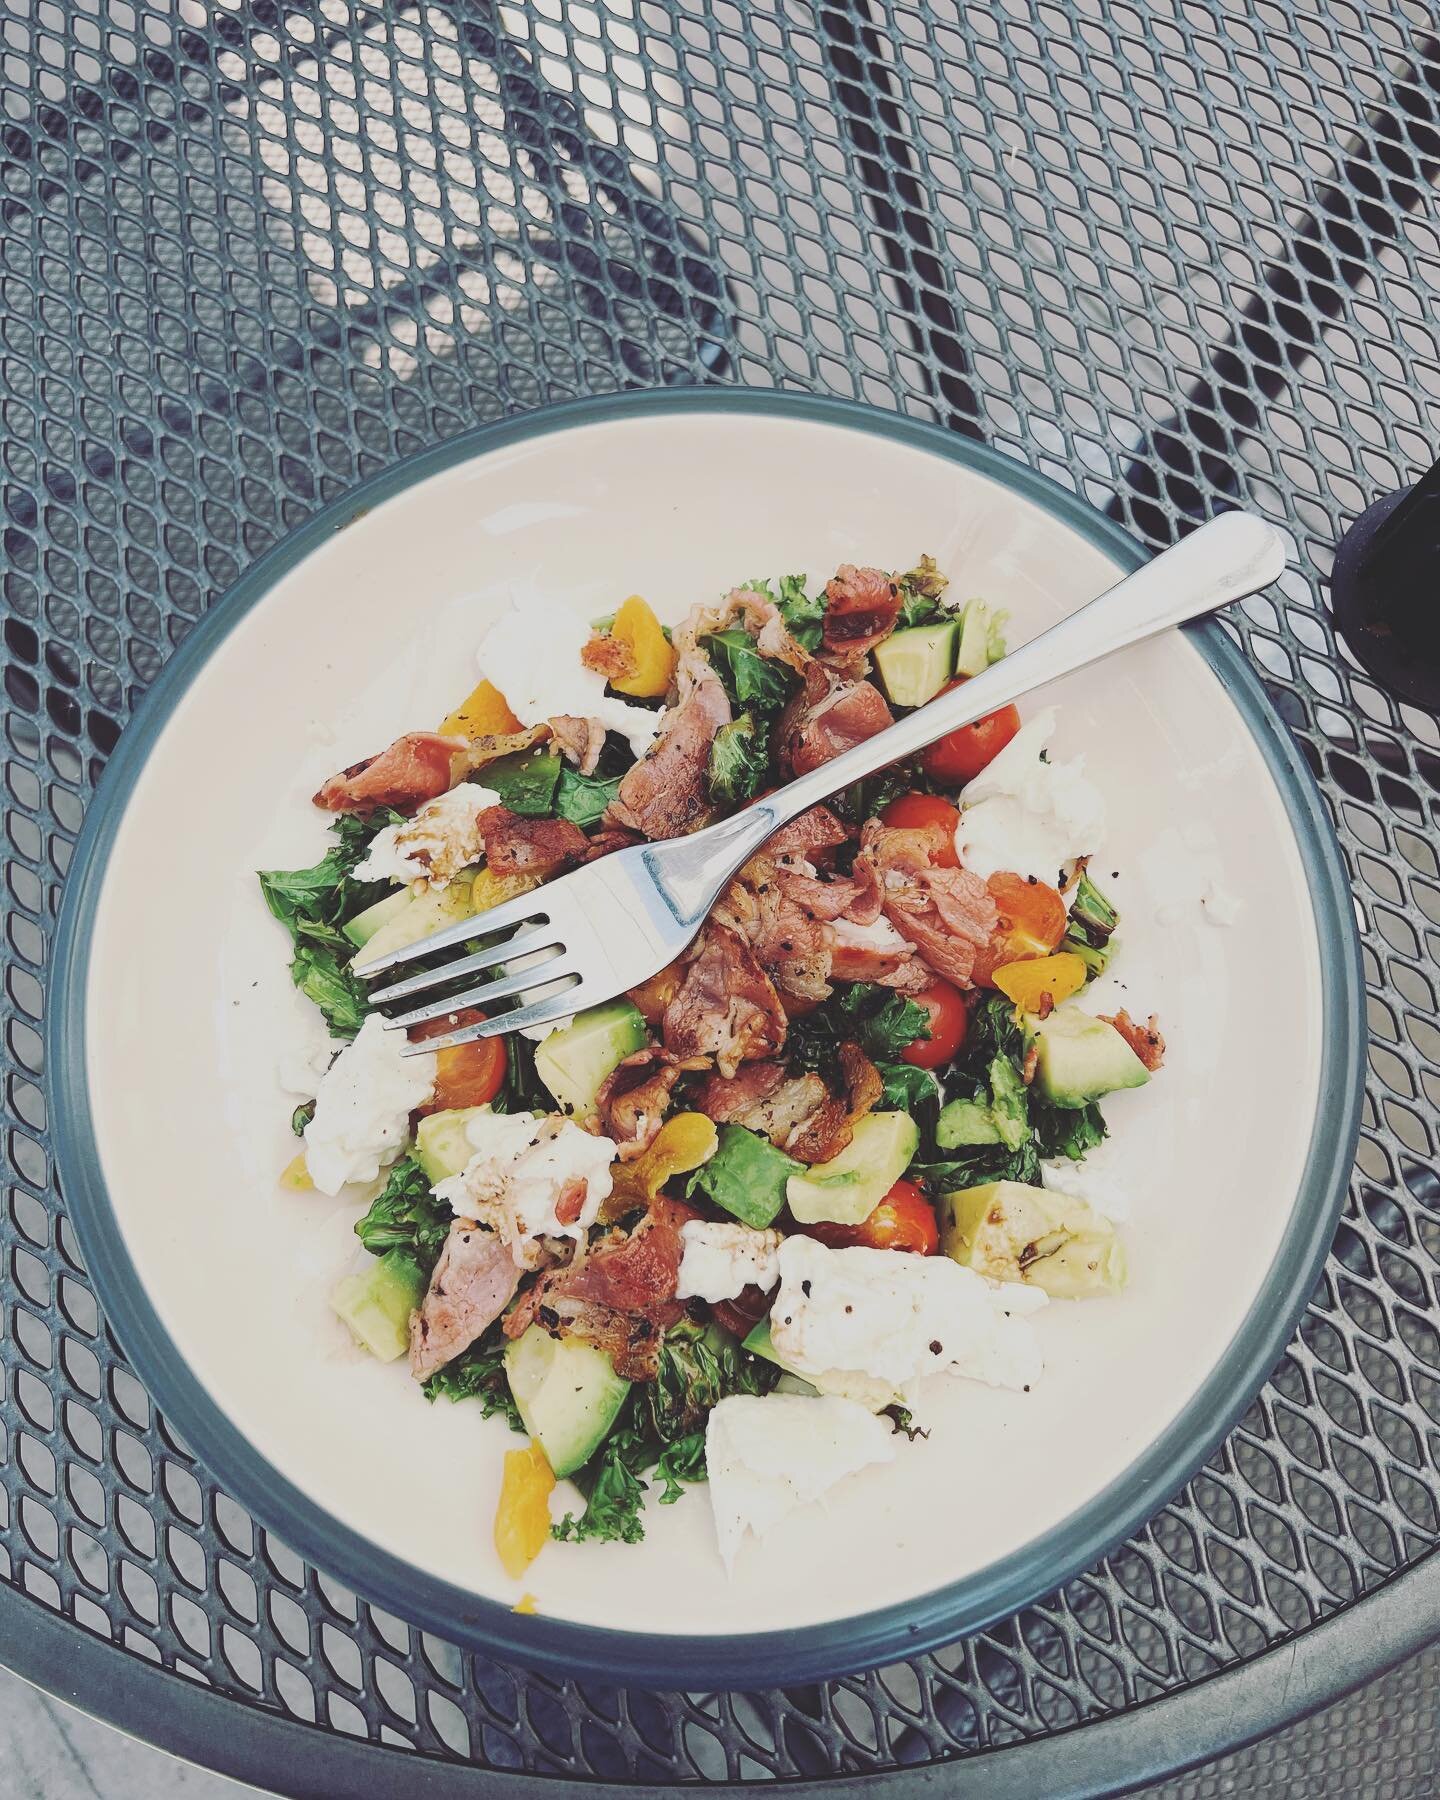 Bacon, avo, apricot Salad

Fry the bacon, tomato&rsquo;s and Kale
Cut up, soft dried apricots and avocado 
Tear and add mozzarella cheese
Season with black pepper and olive oil

#food #motivation #foodie #salad #sport #tenniscoach #fuel